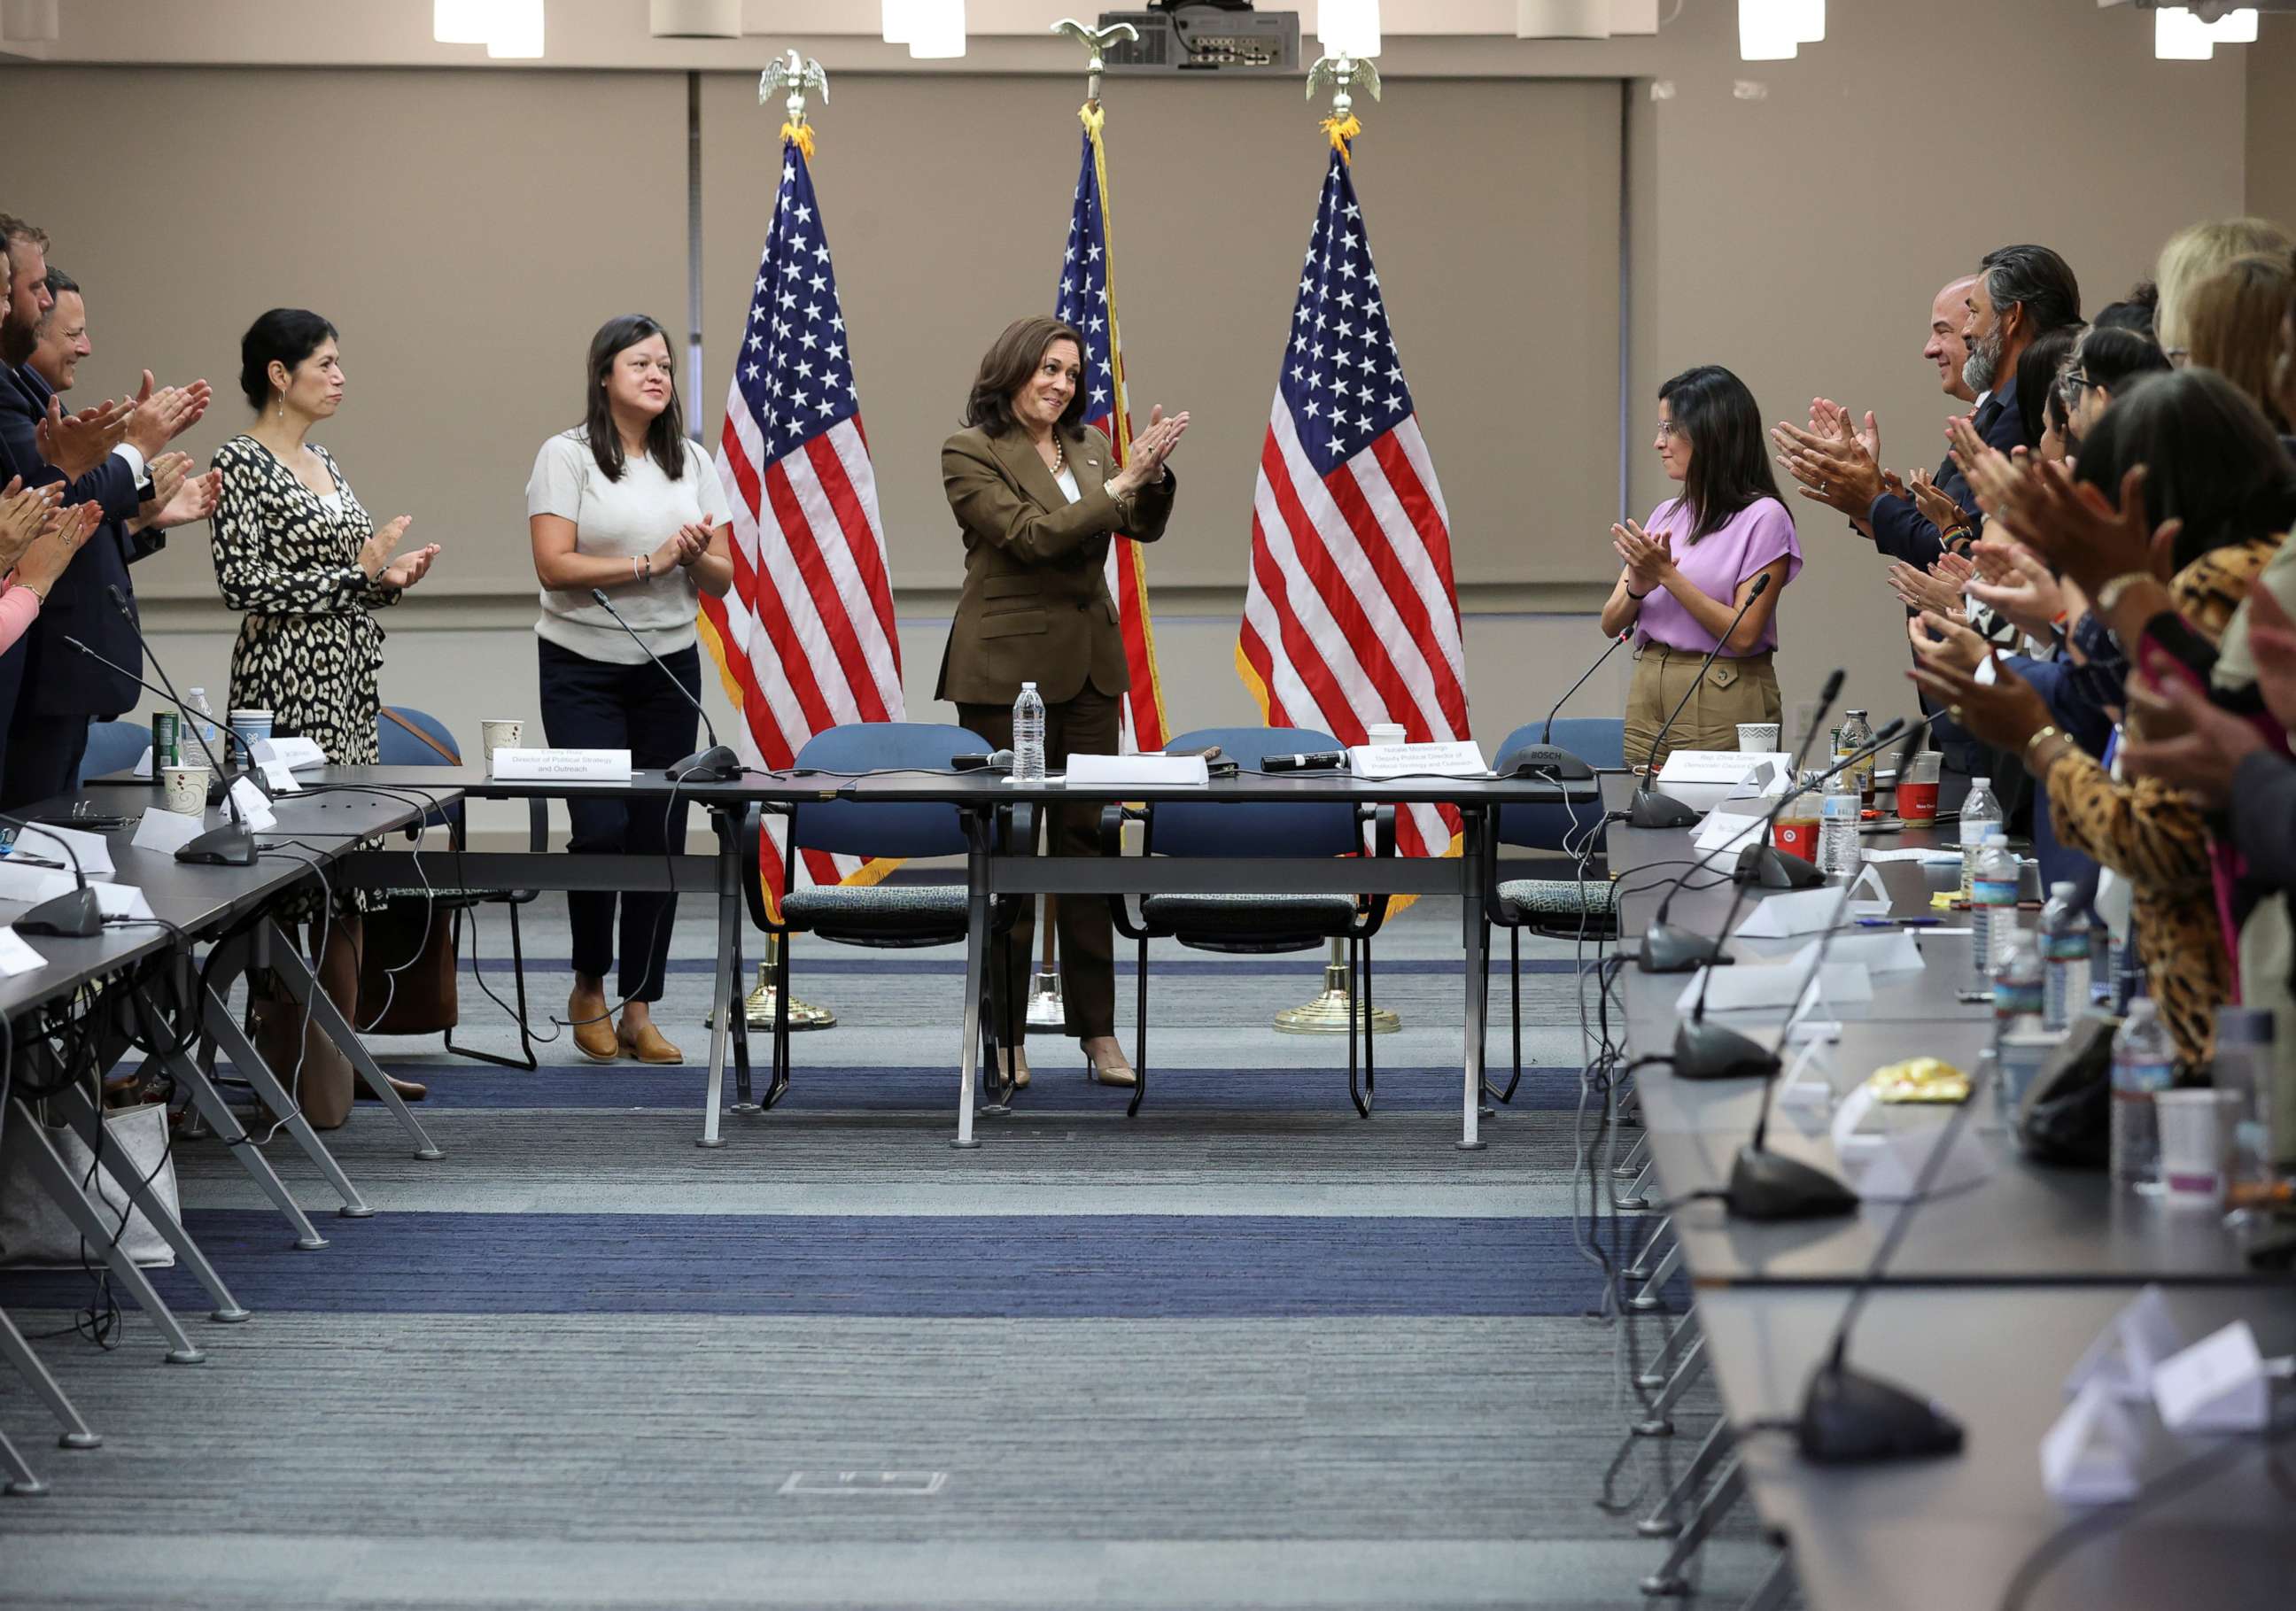 PHOTO: Vice President Kamala Harris meets with Democratic members of the Texas state legislature, who fled the state in an effort to slow changes to election laws and voter access, in Washington, July 13, 2021.